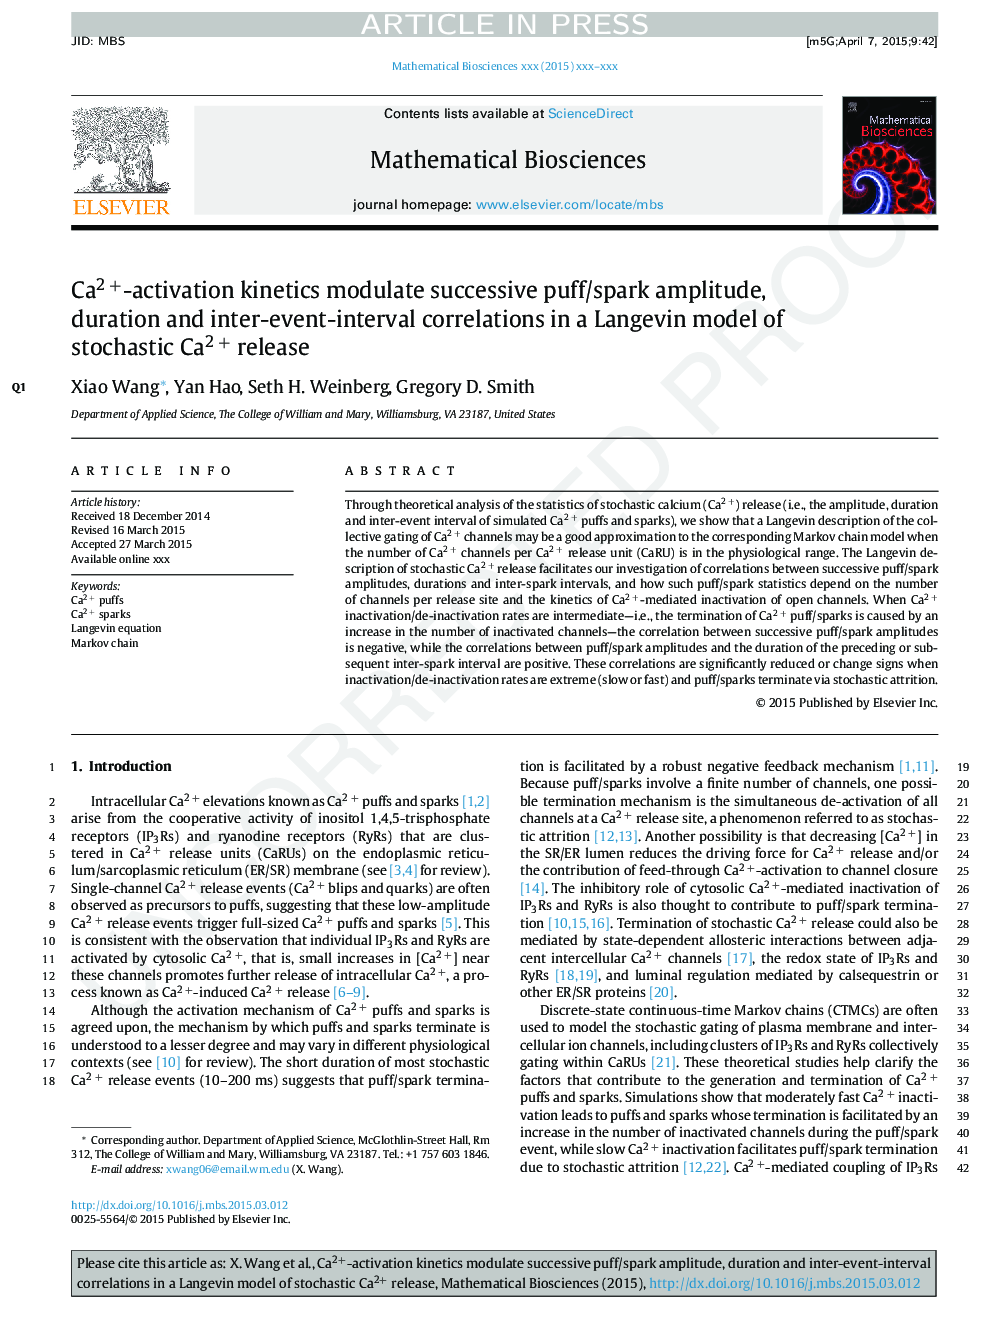 Ca2+-activation kinetics modulate successive puff/spark amplitude, duration and inter-event-interval correlations in a Langevin model of stochastic Ca2+ release